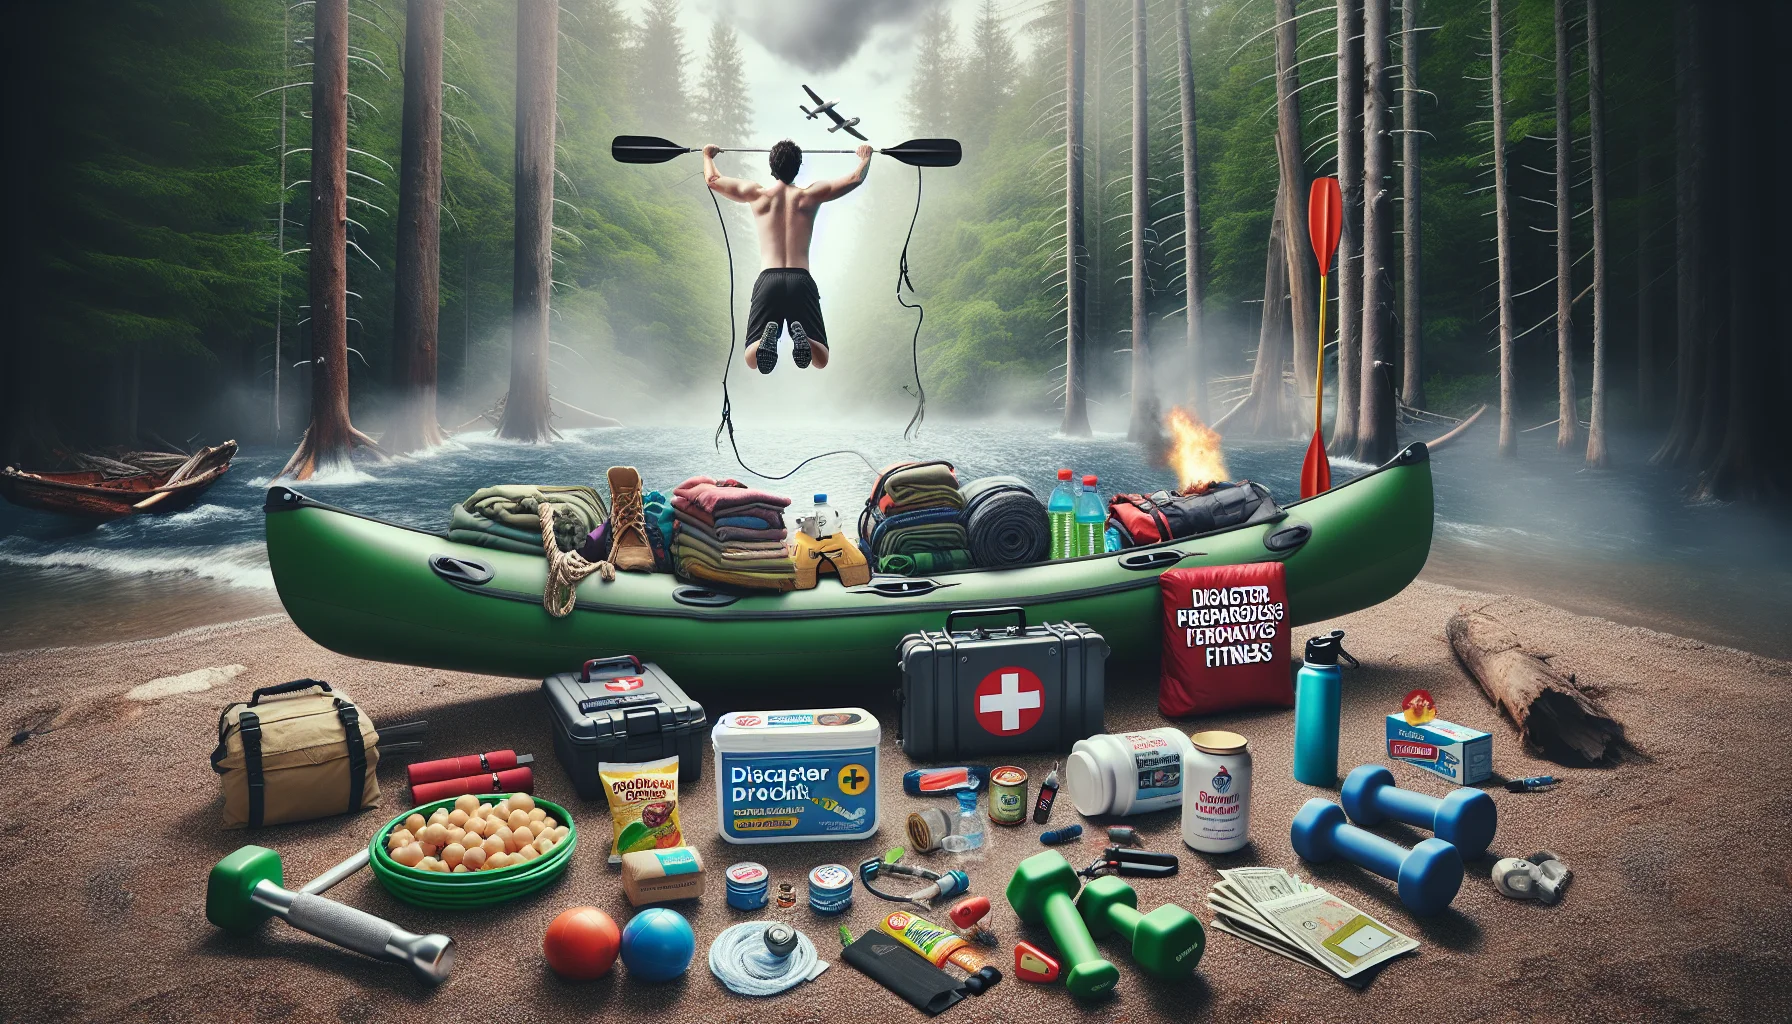 Create a humorous and engaging image depicting a disaster preparedness kit designed to promote fitness. Imagine this kit as being filled with creative tools for exercise and survival like lightweight dumbbells, a jump rope, a compact inflatable canoe, portable protein snacks, drinks, first aid supplies, and a detailed fitness guide. The scenario should be playfully dramatic, perhaps showing an enthusiastic individual using the kit while camping in a dense forest or while stranded on a deserted island. The image should encourage people to find joy in exercise even in challenging circumstances.